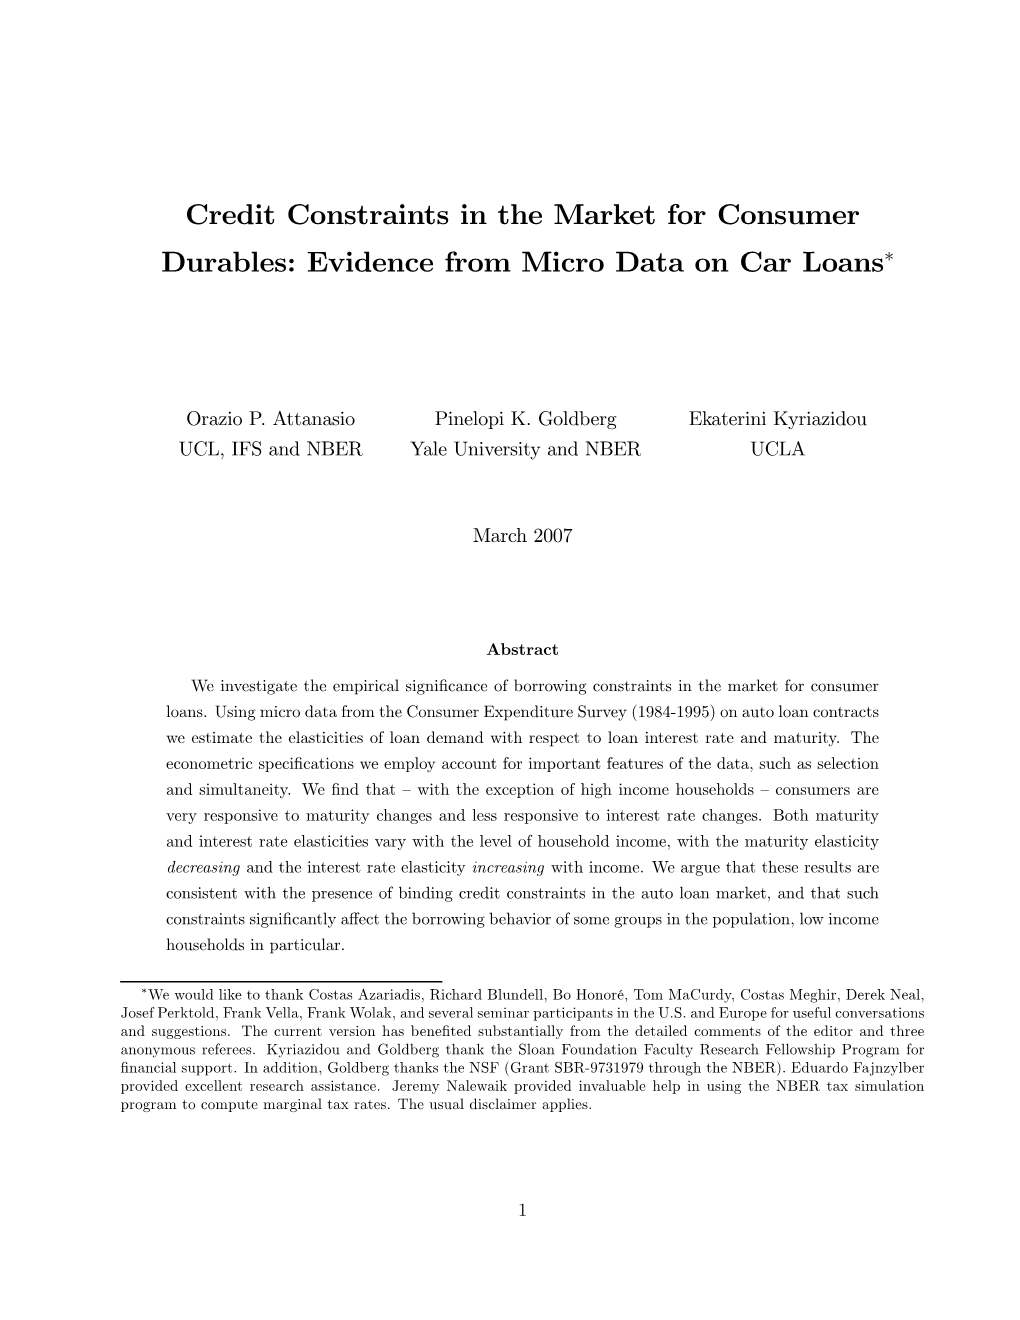 Credit Constraints in the Market for Consumer Durables: Evidence from Micro Data on Car Loans”, NBER Working Paper, No